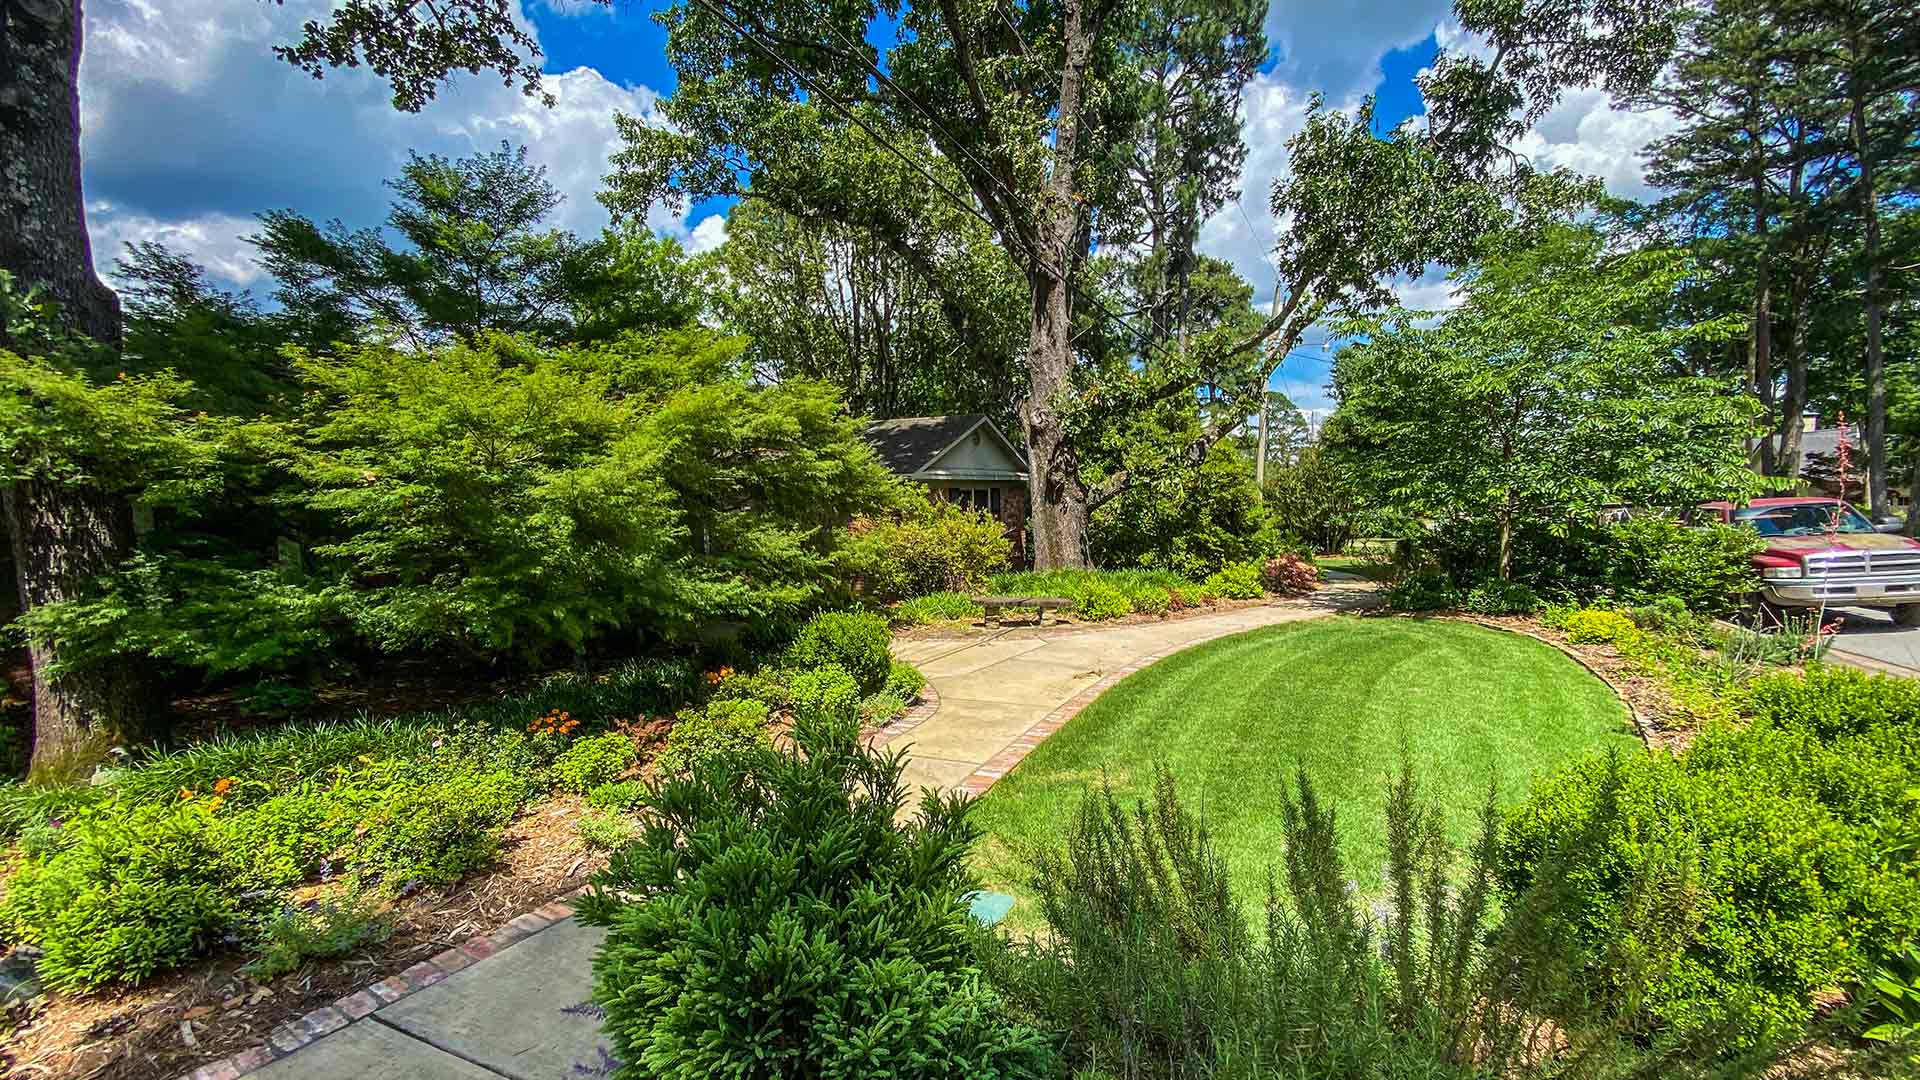 Lush garden with ornamental plants and landscape beds near North Little Rock, AR.